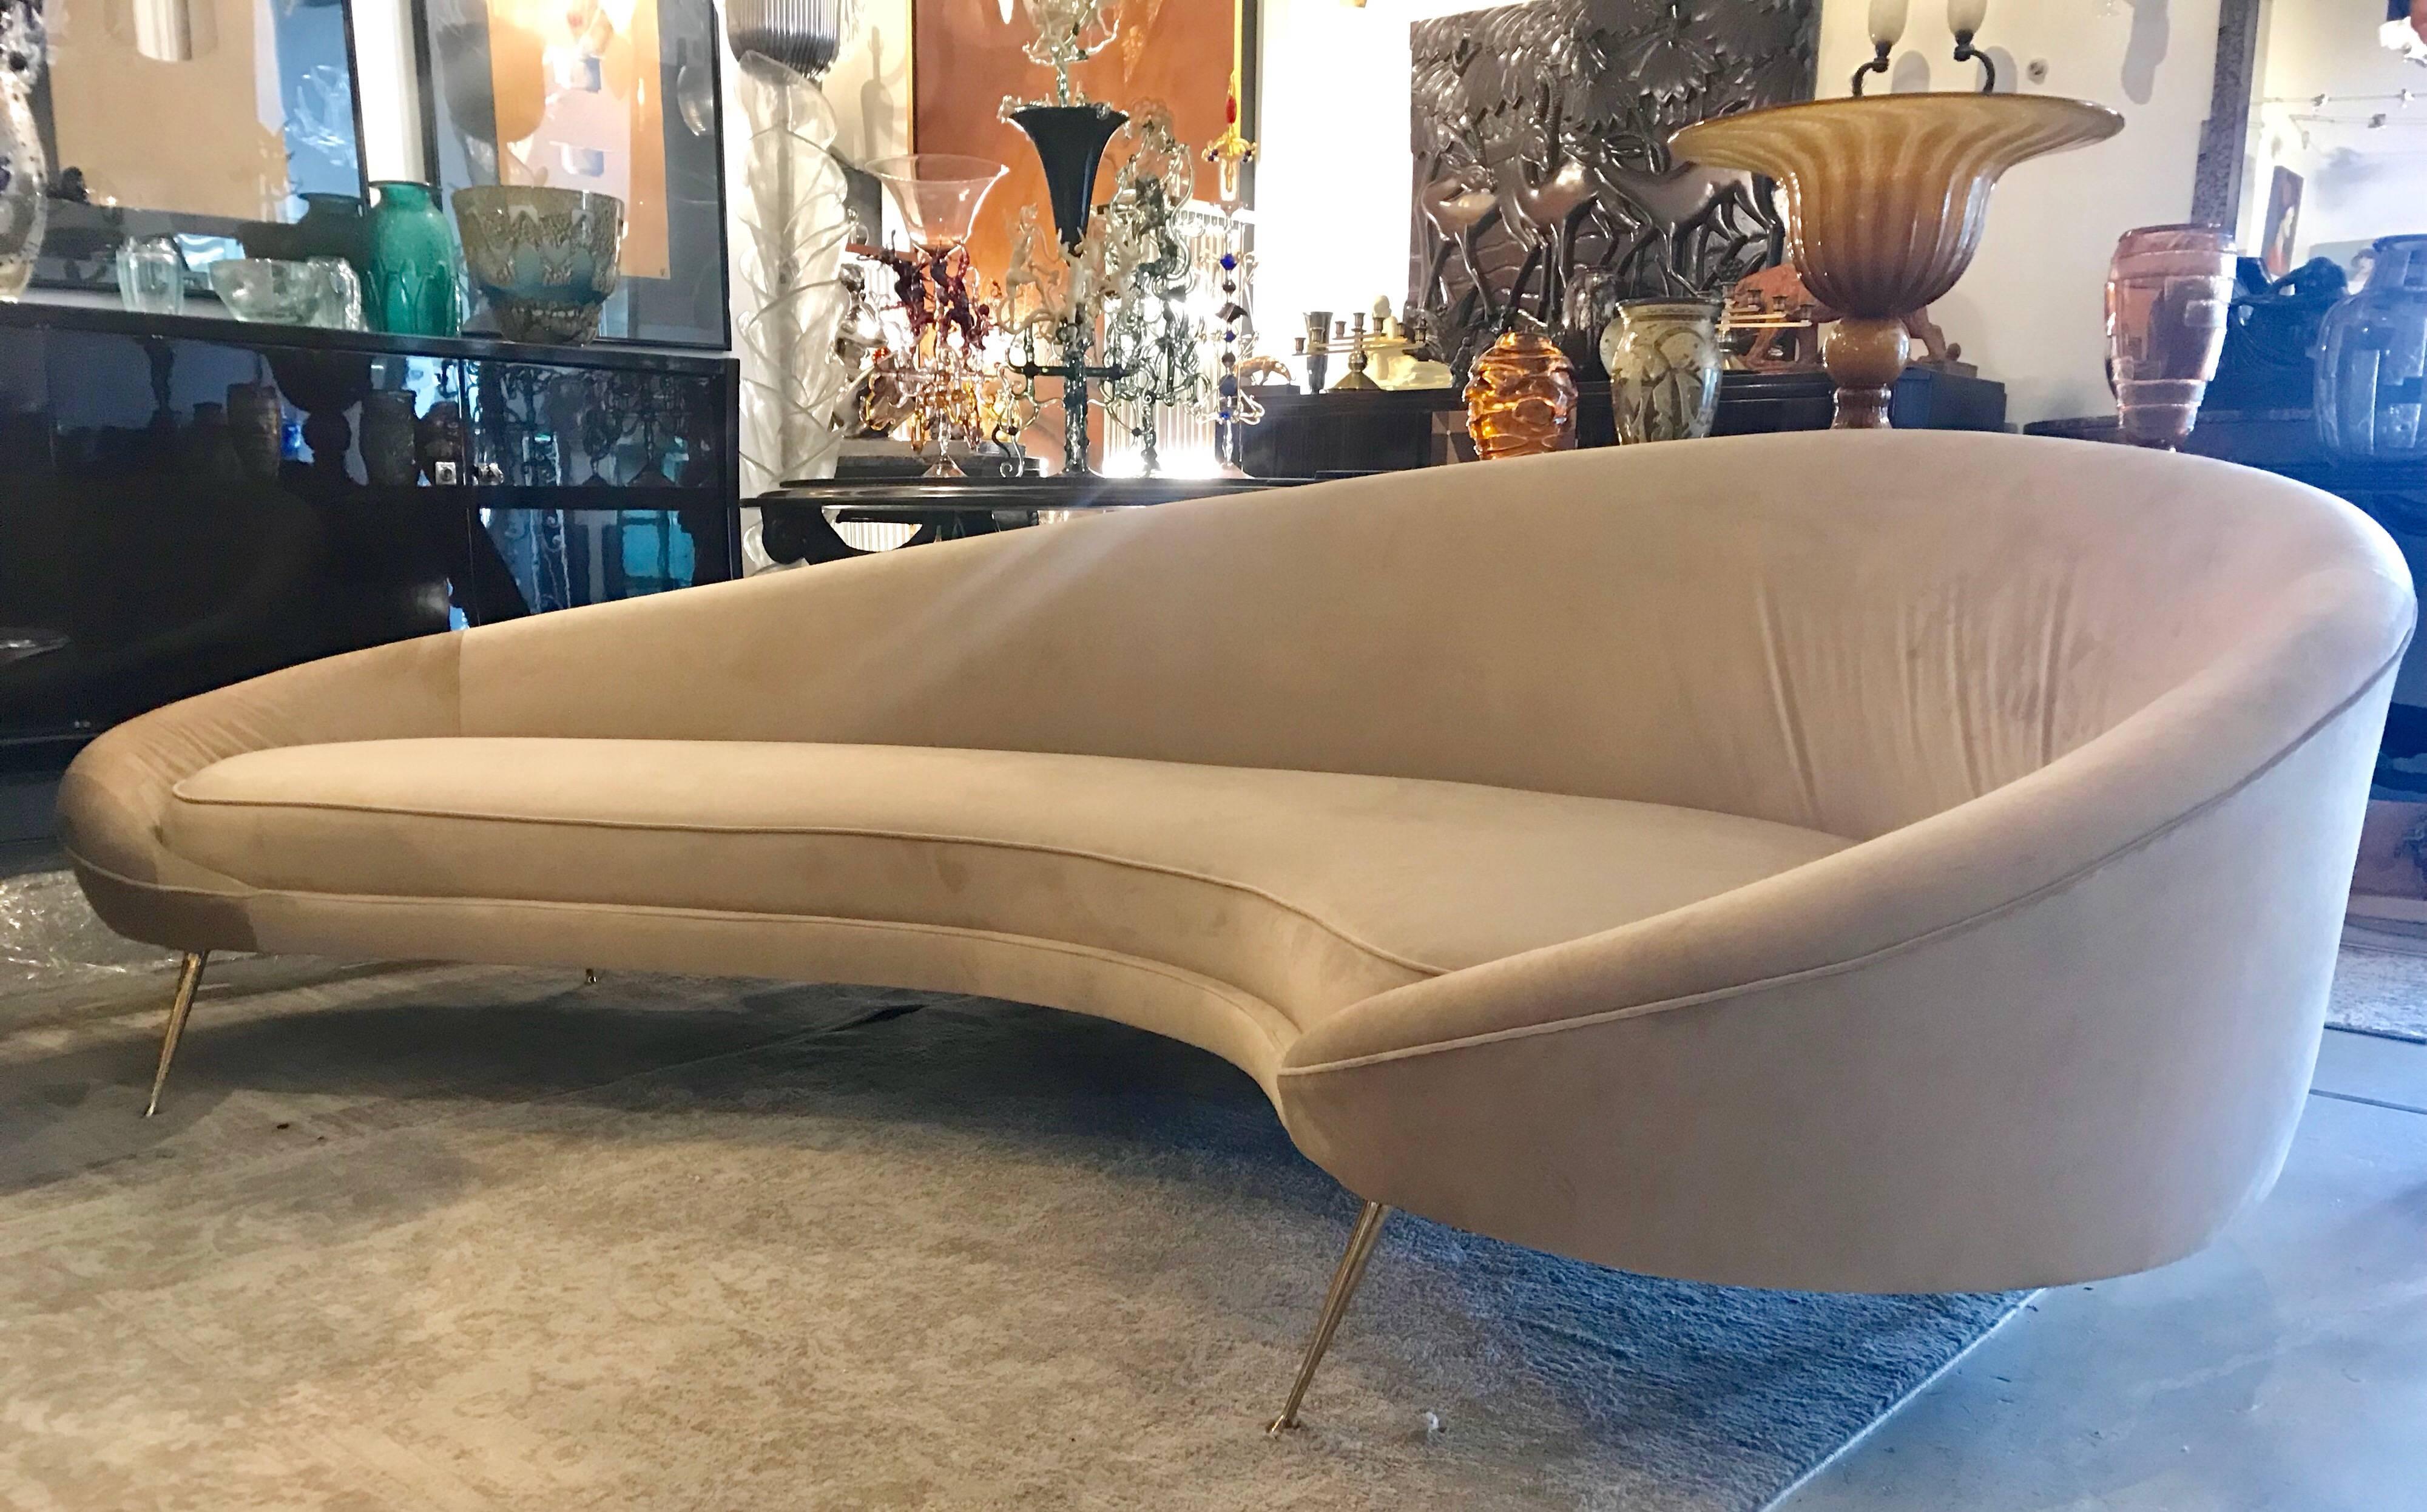 Large and comfortable midcentury Italian curved sofa with tapered brass legs and beige velvet upholstery. Beautiful from every angle.